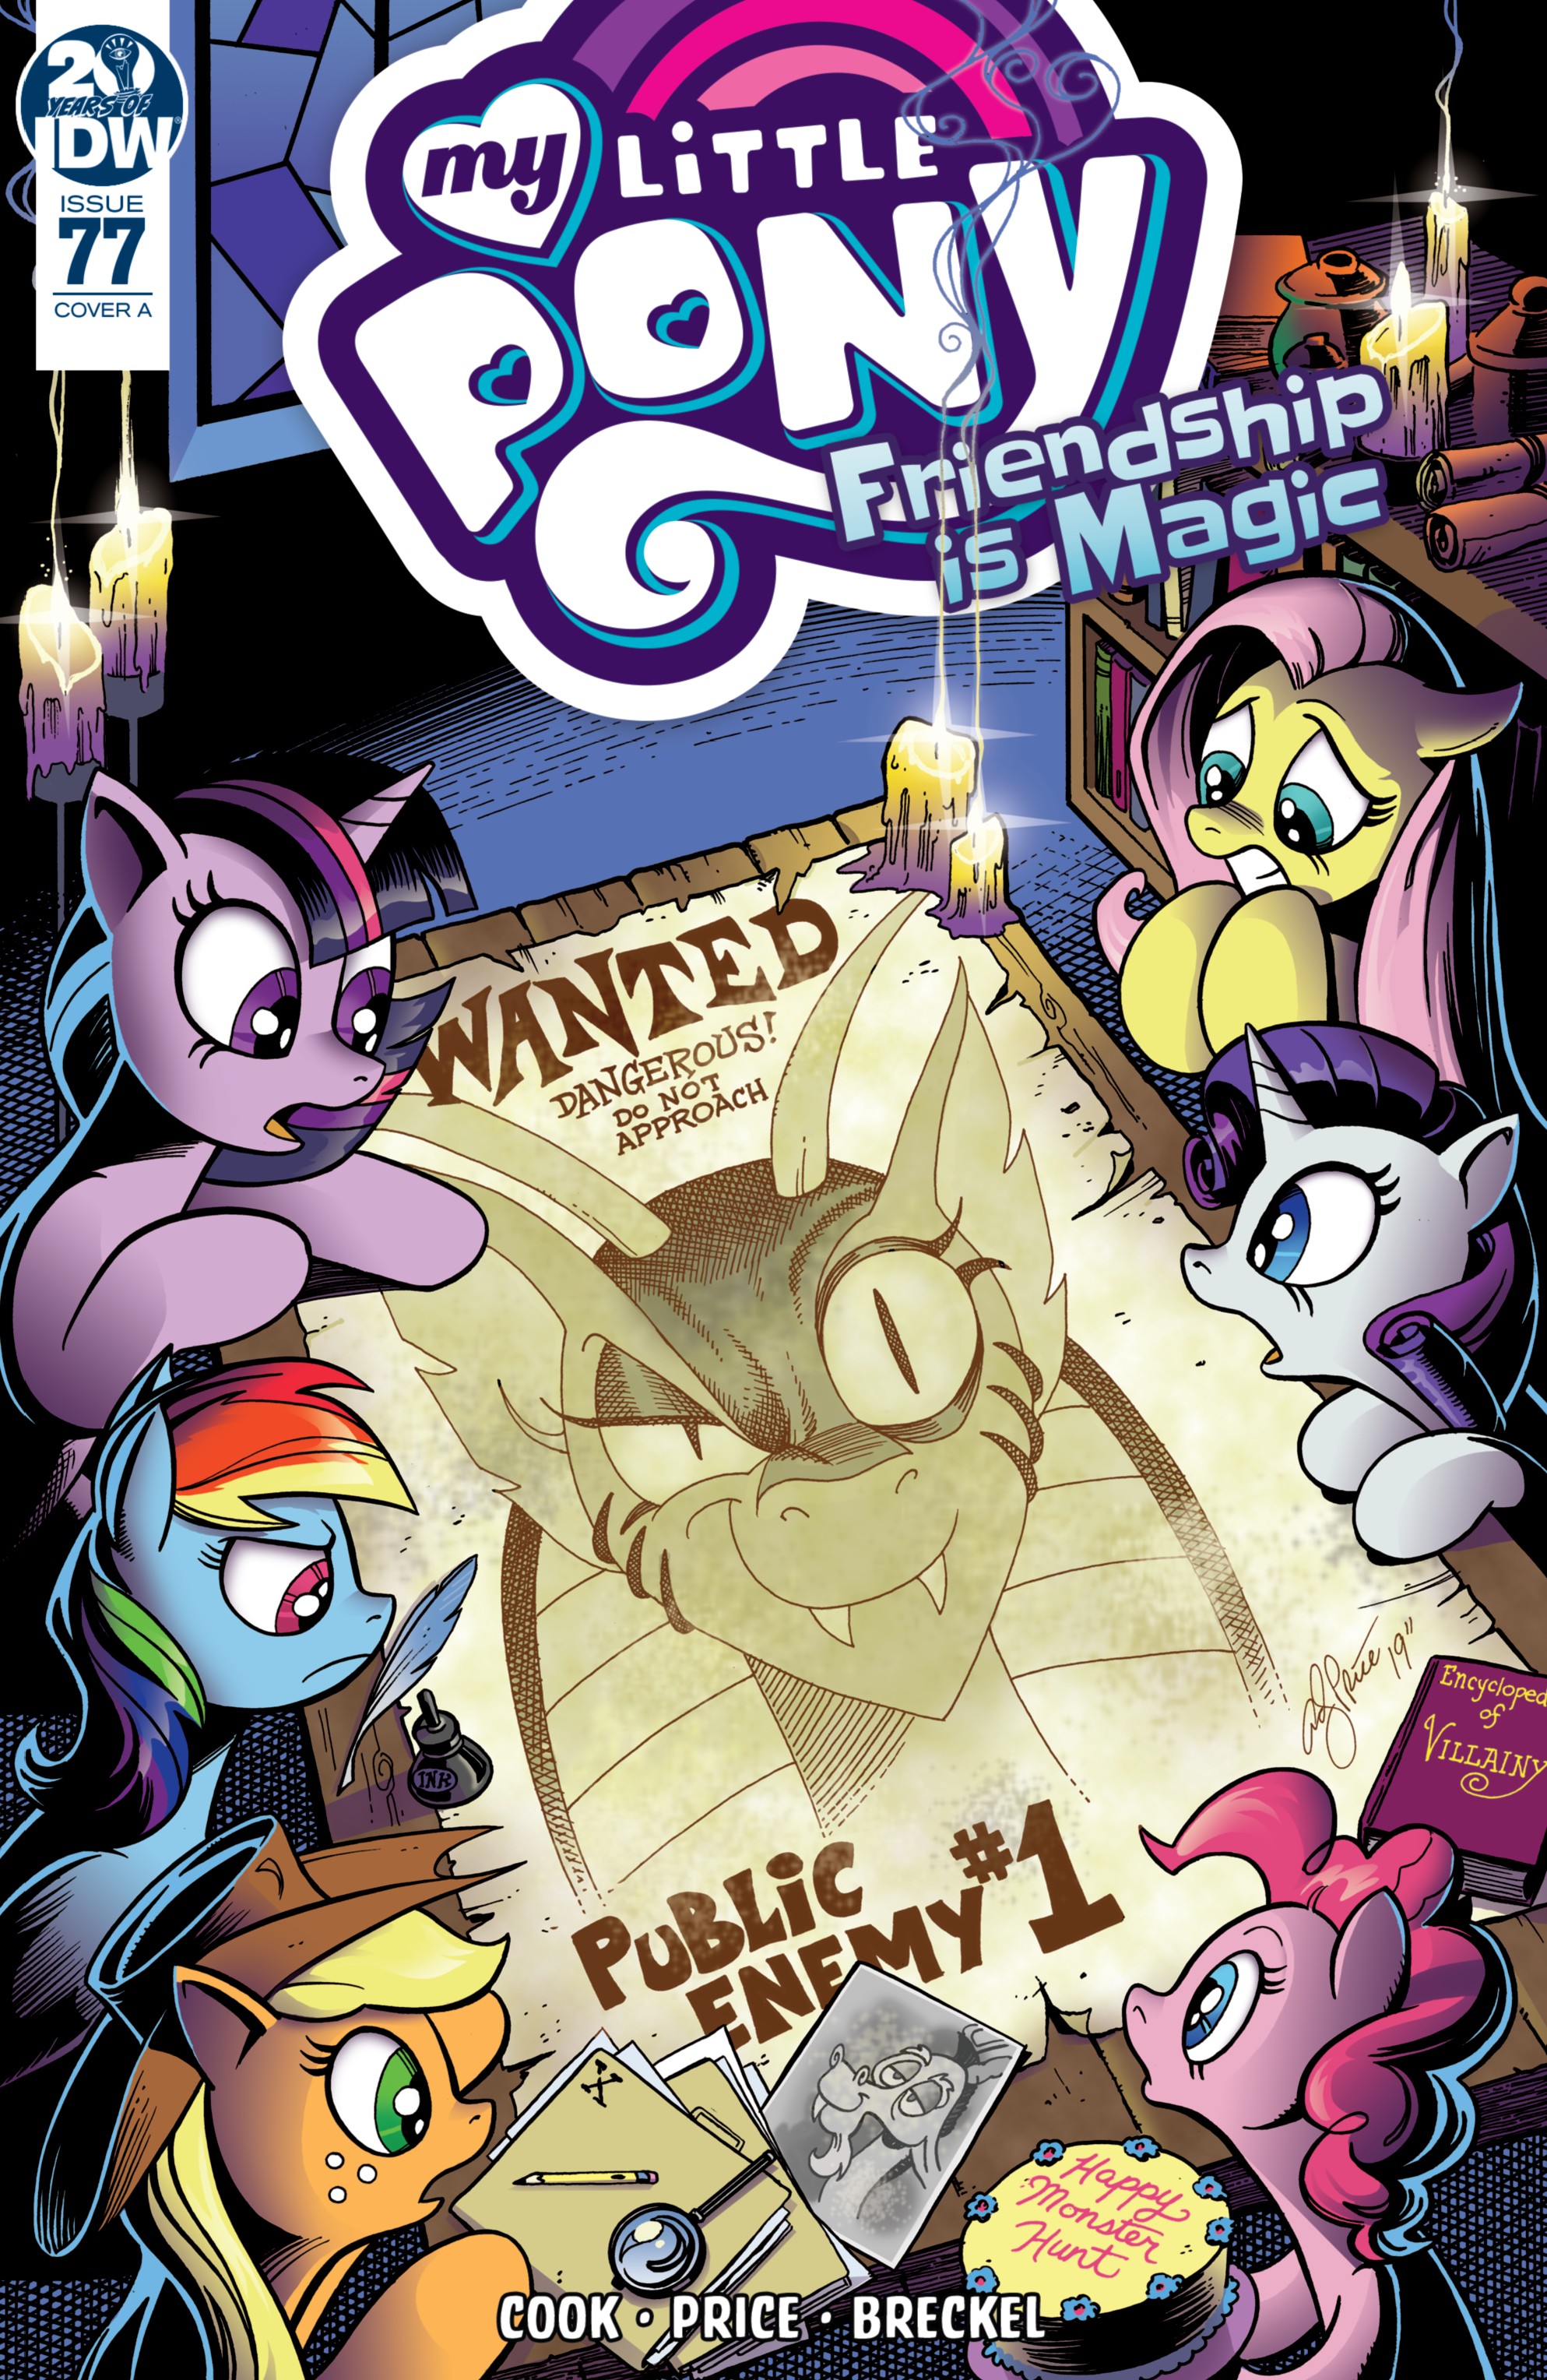 Read online My Little Pony: Friendship is Magic comic -  Issue #77 - 1